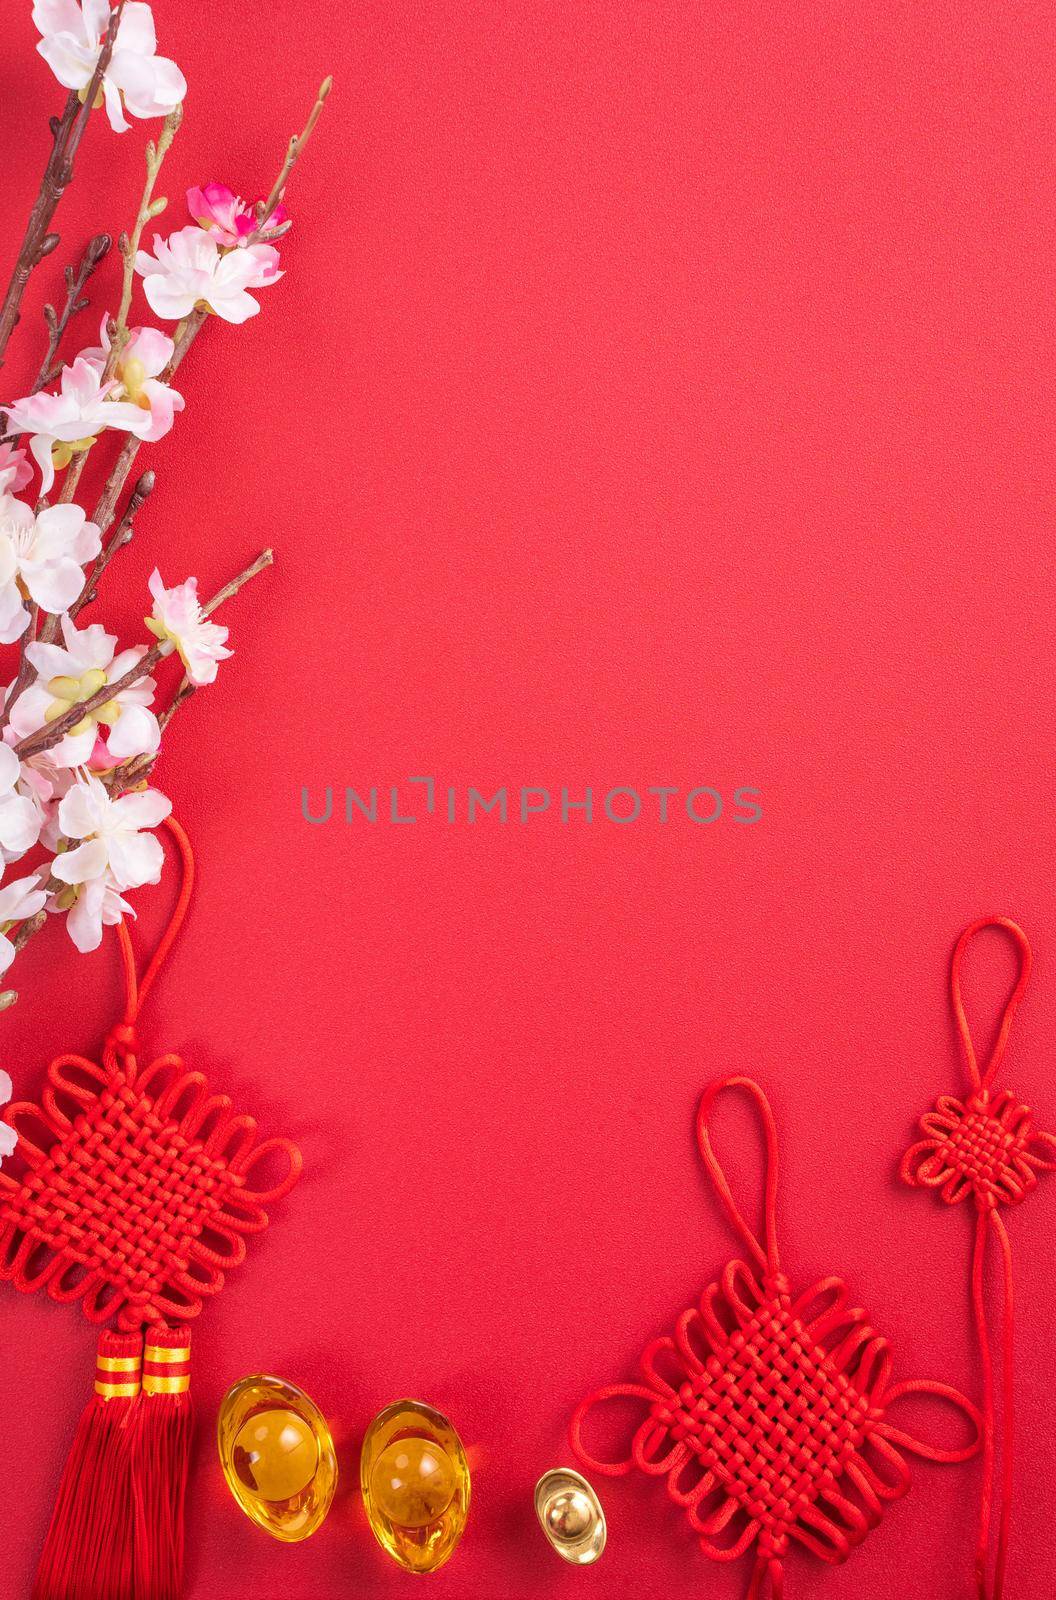 Design concept of Chinese lunar new year - Beautiful Chinese knot with plum blossom isolated on red background, flat lay, top view, overhead layout. by ROMIXIMAGE